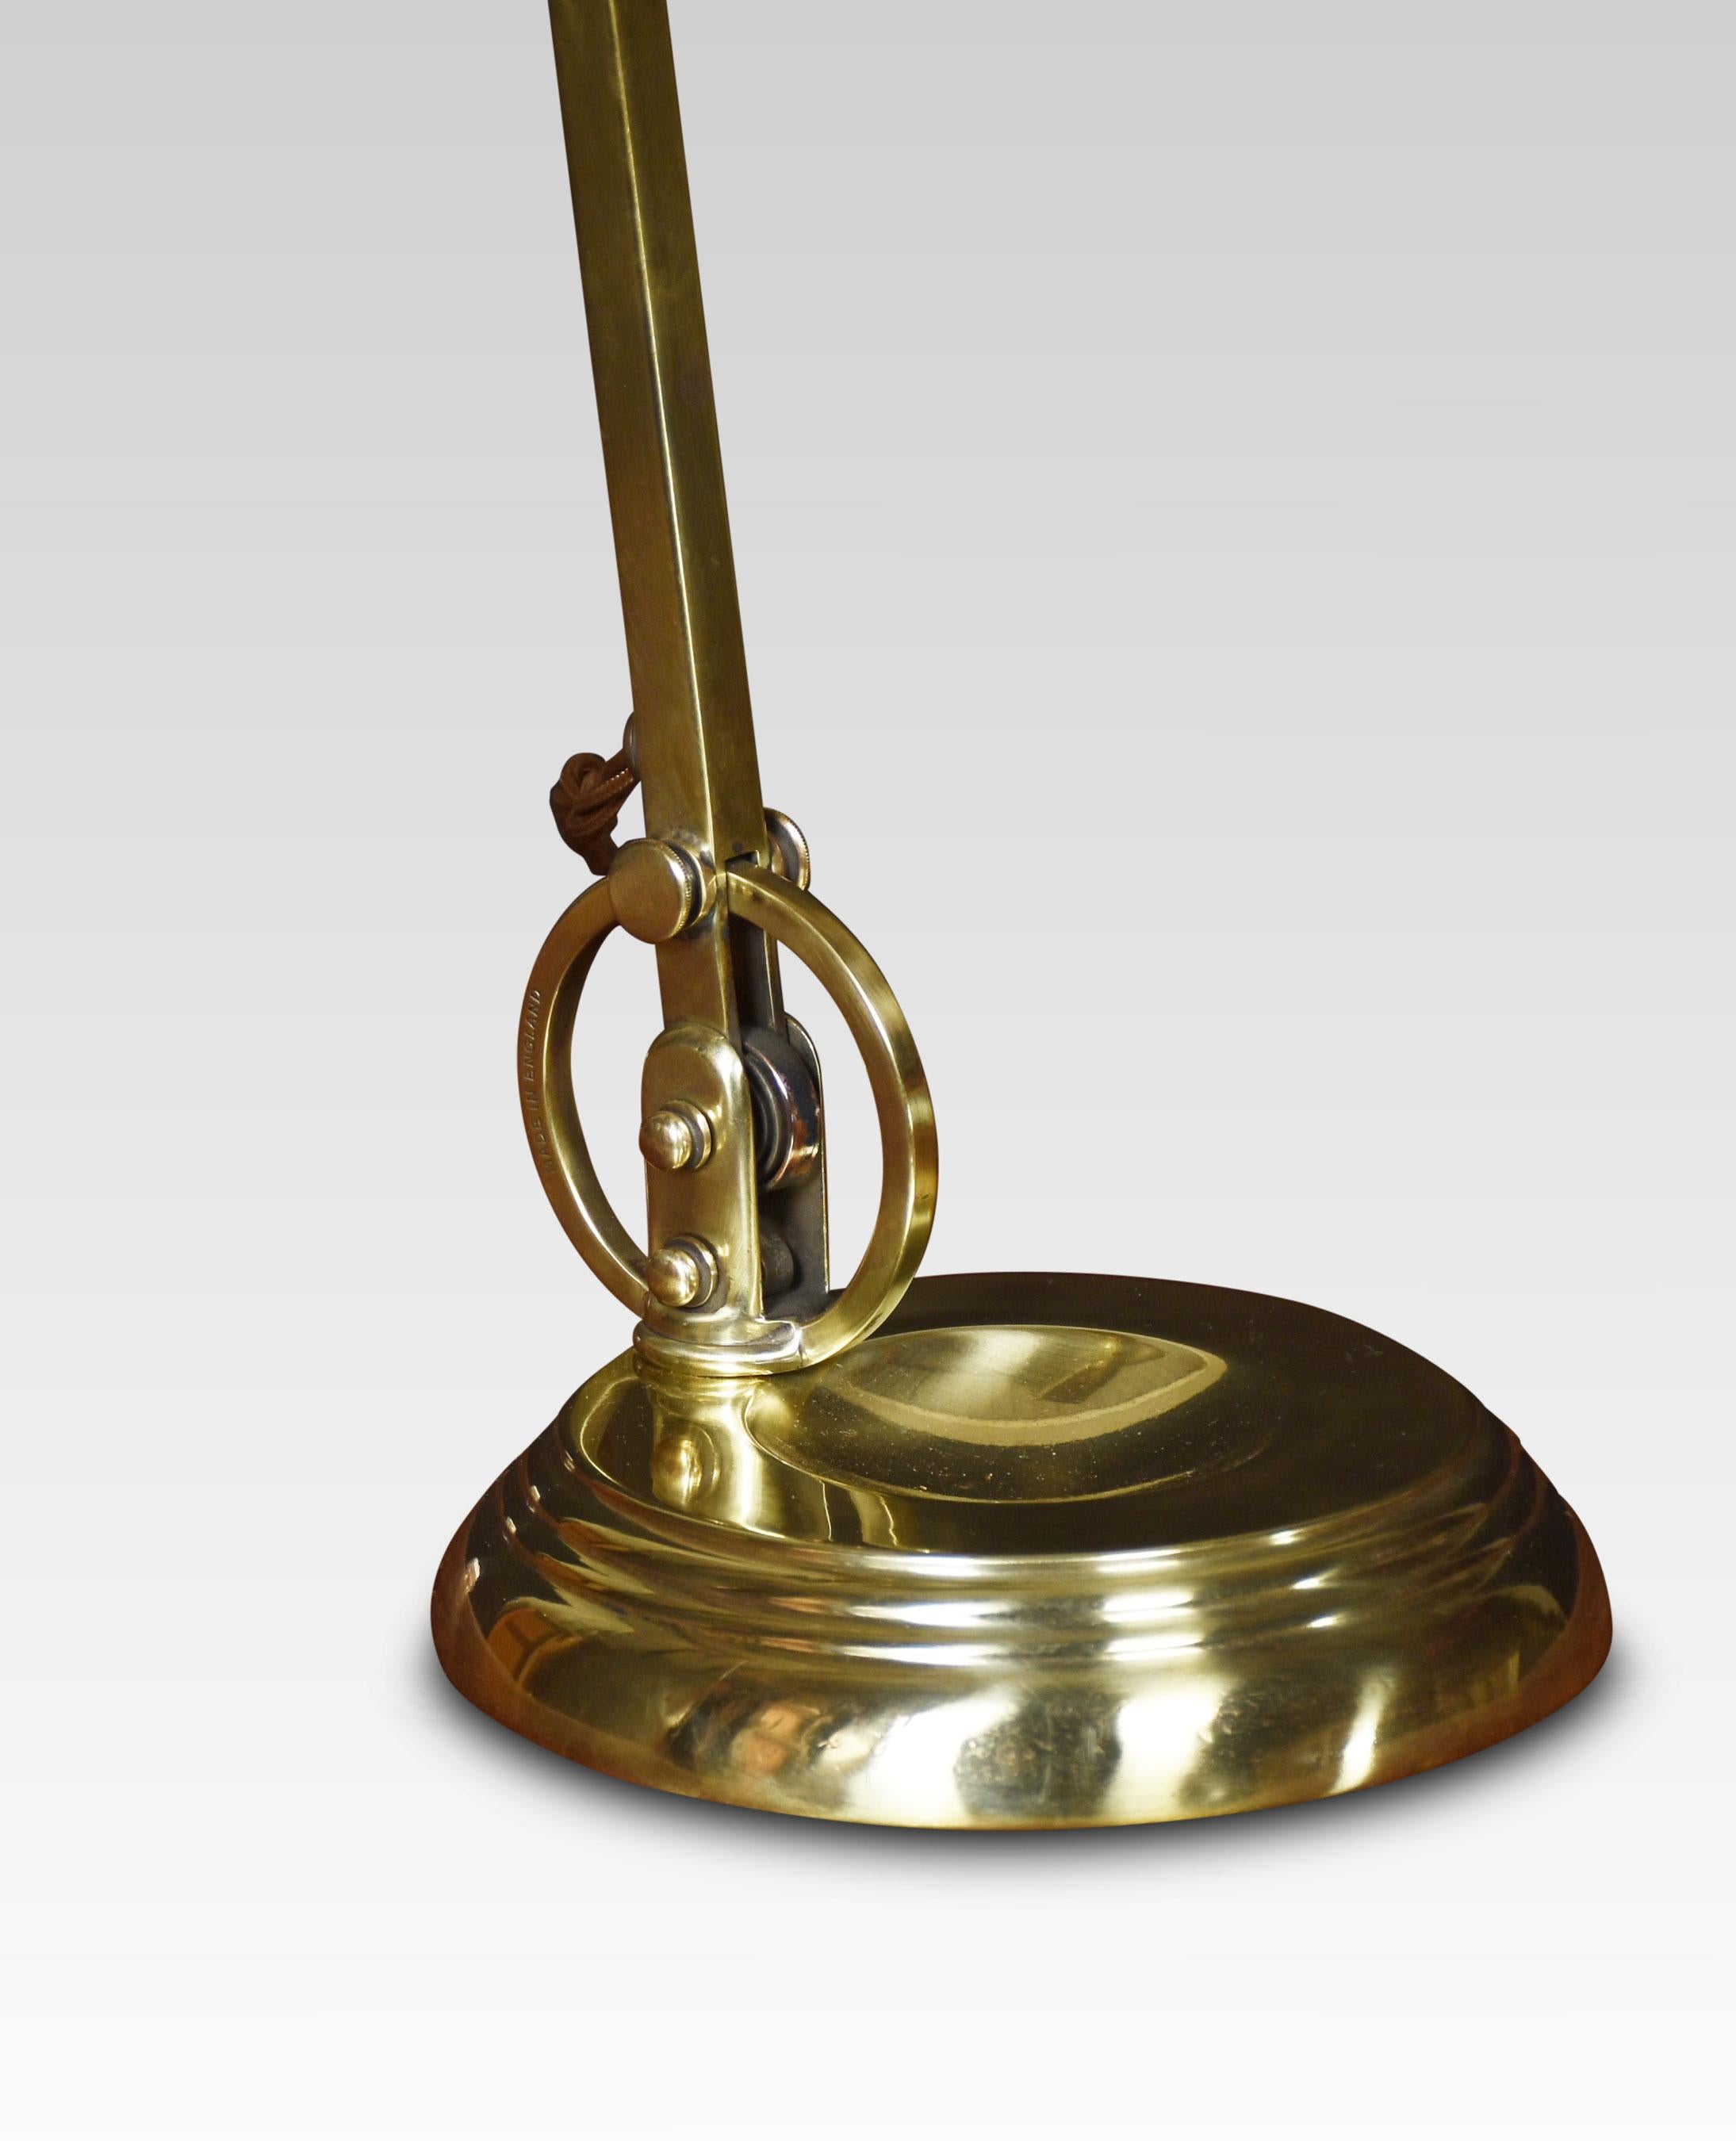 Bankers brass desk lamp, the shaped brass base, and pivoted sweeping arm supporting adjustable lampshade. The lamp has been rewired.
Dimensions
Height 16.5 inches
Width 8.5 inches
Depth 7 inches.